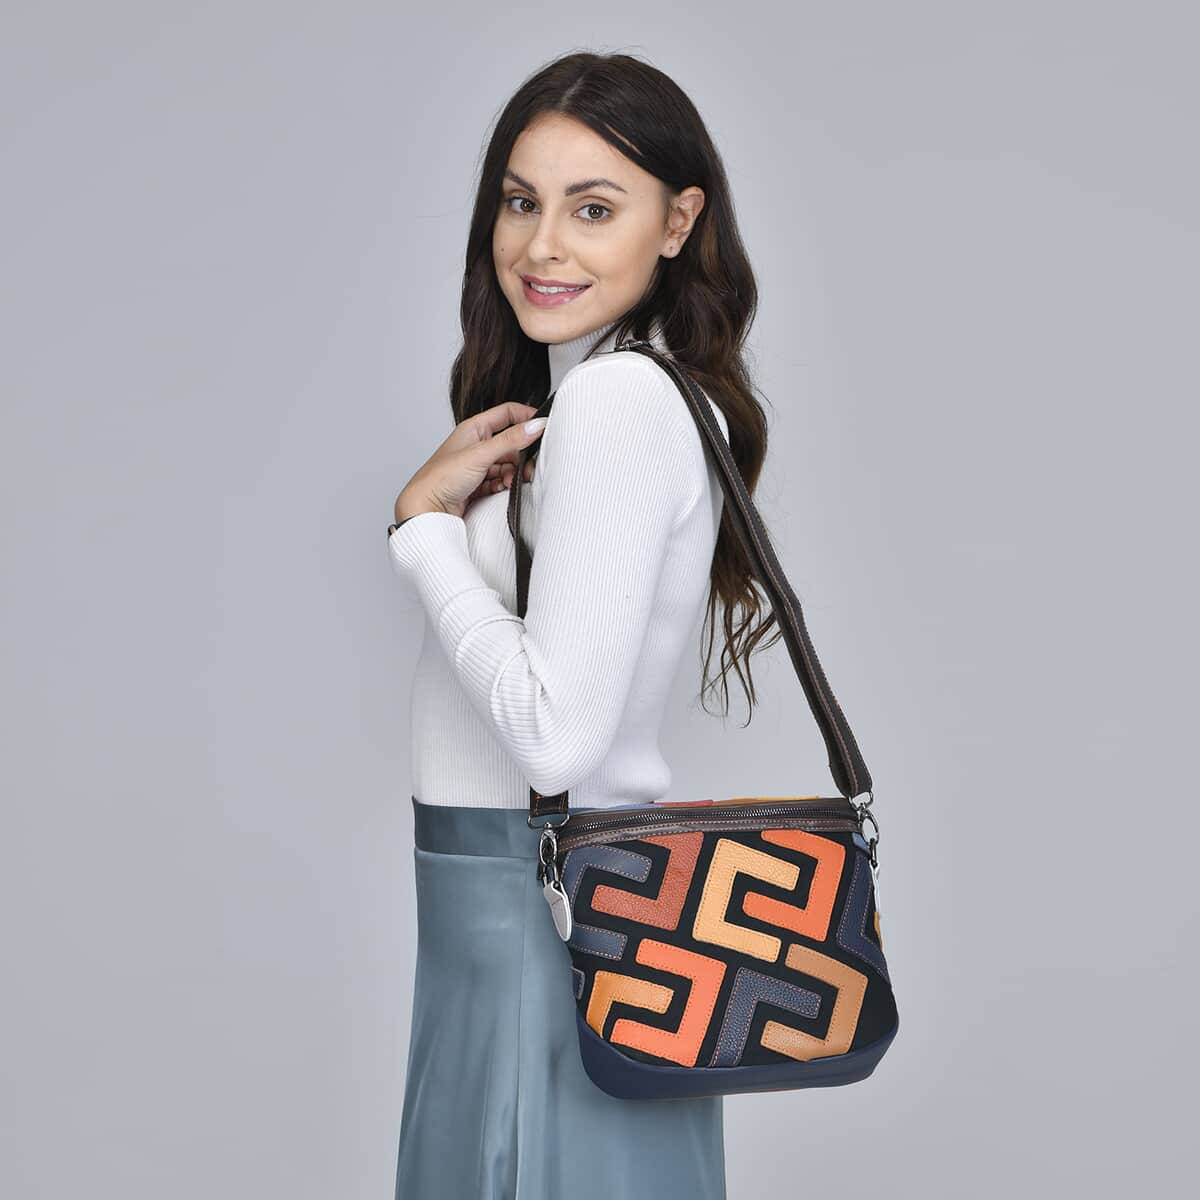 CHAOS BY ELSIE Multi Color Fret Pattern Genuine Leather Crossbody Bag with Shoulder Strap (9.84"x3.15"x8.27") image number 1